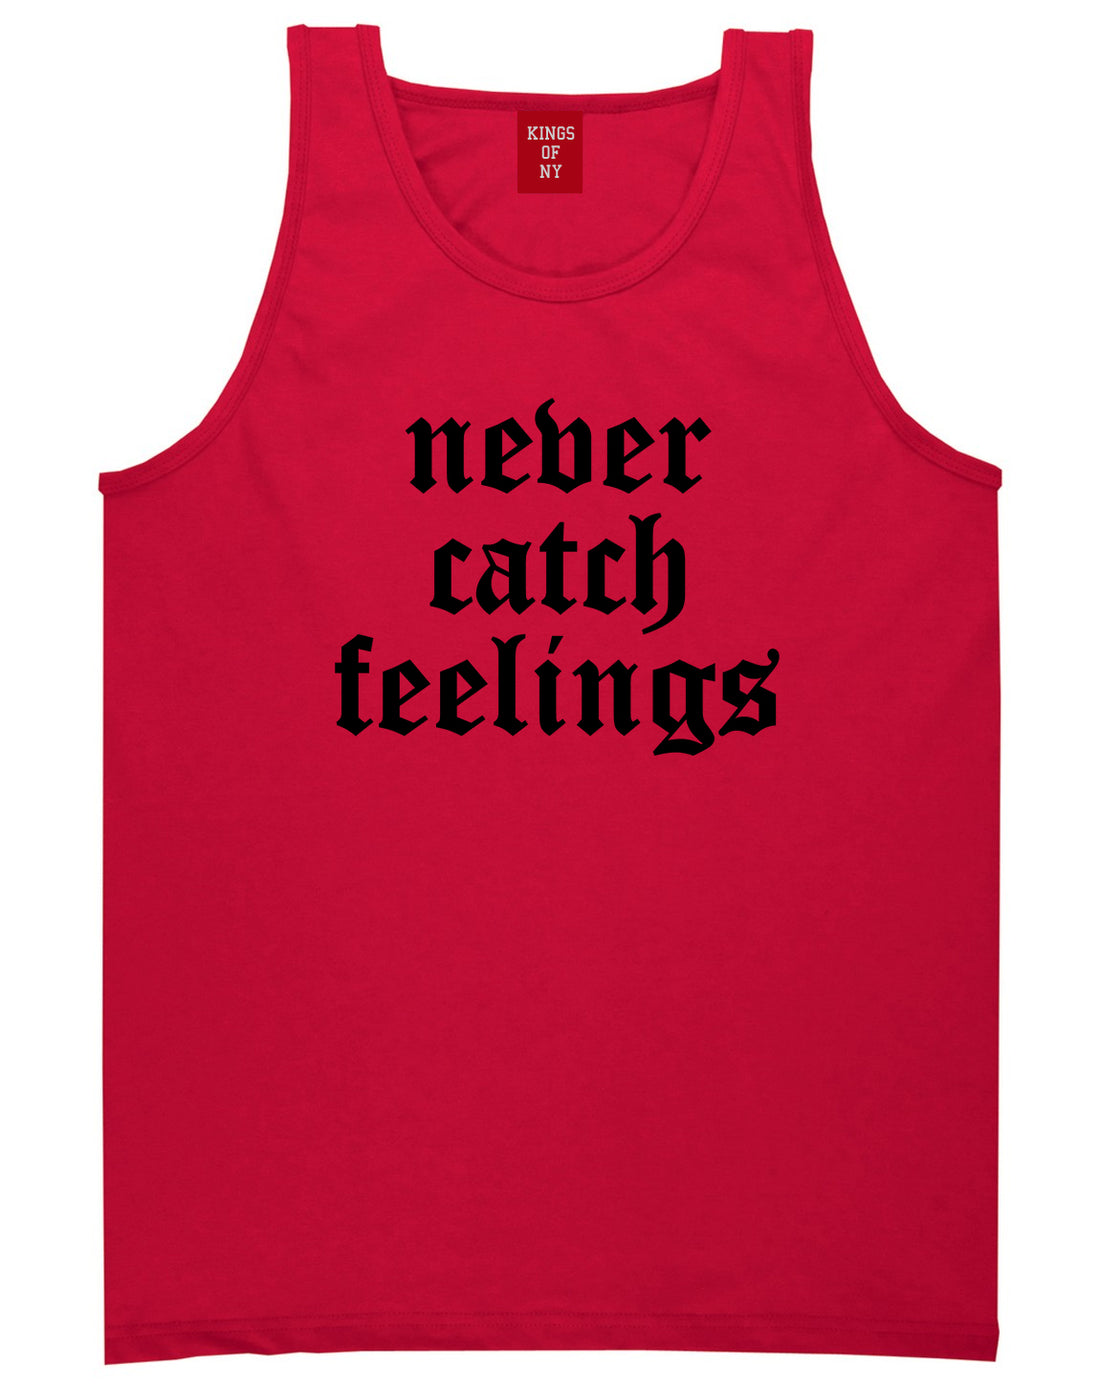 Never Catch Feelings Mens Tank Top Shirt Red by Kings Of NY